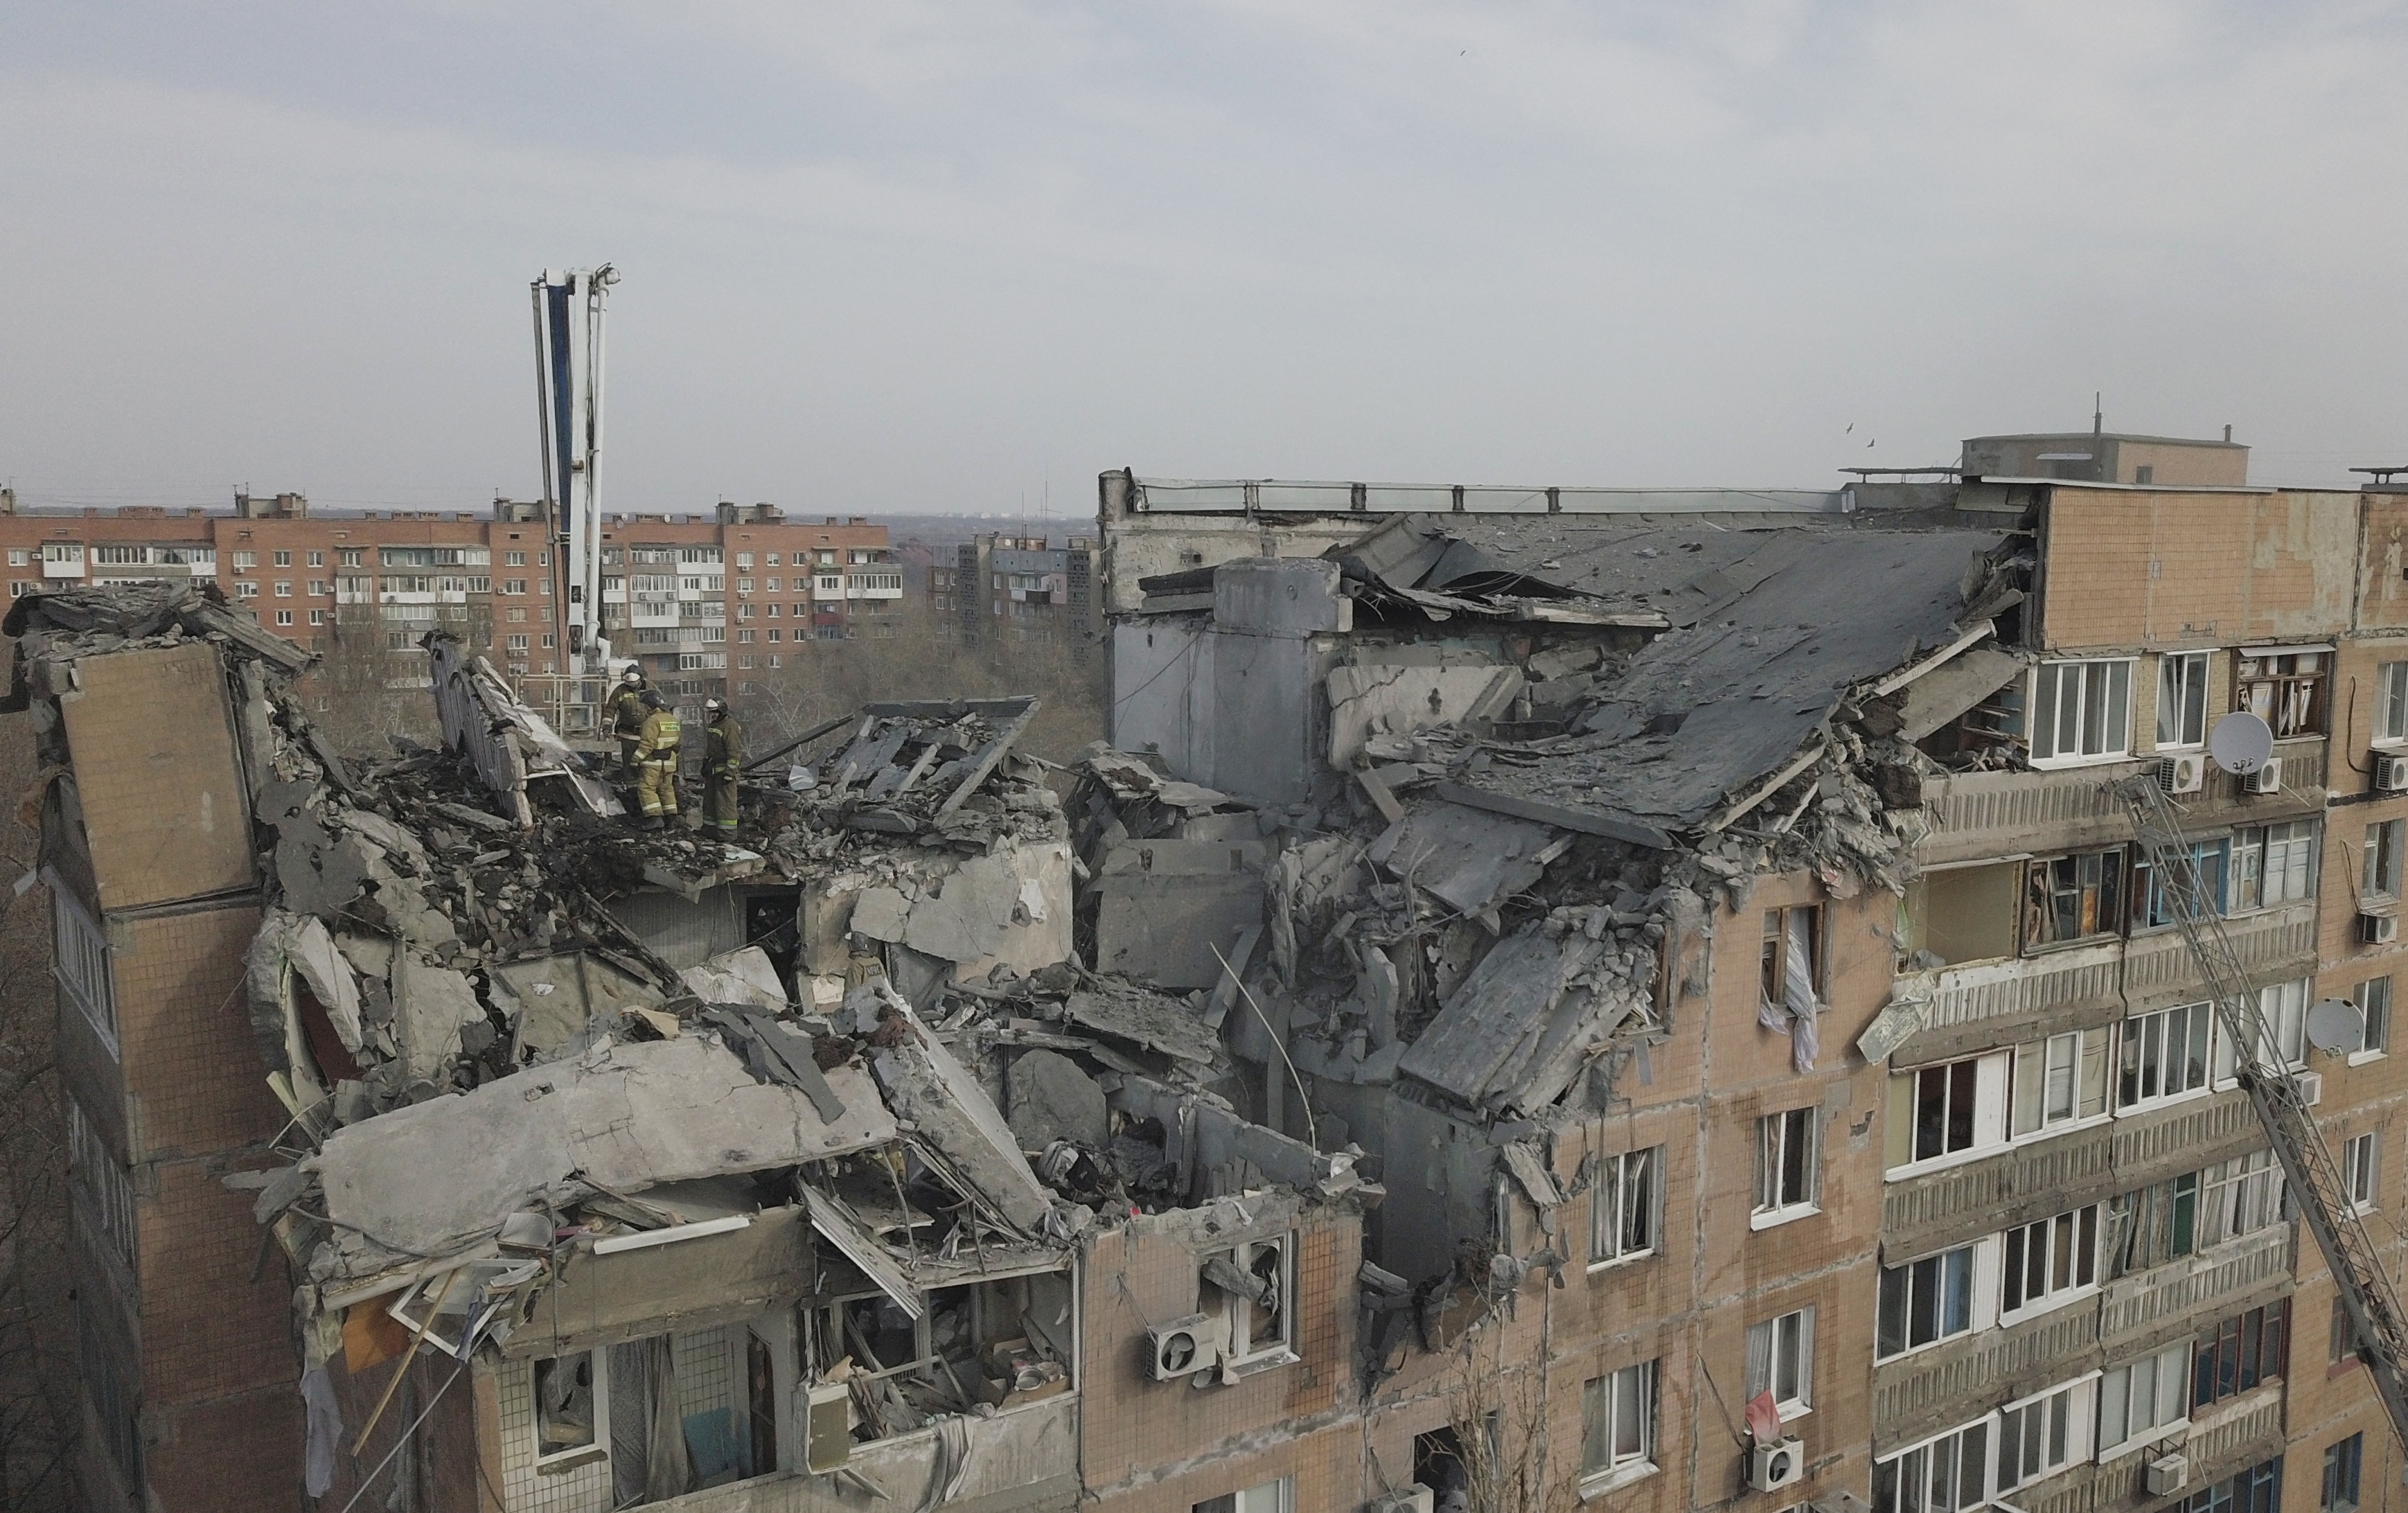 The aftermath of shelling in Donetsk